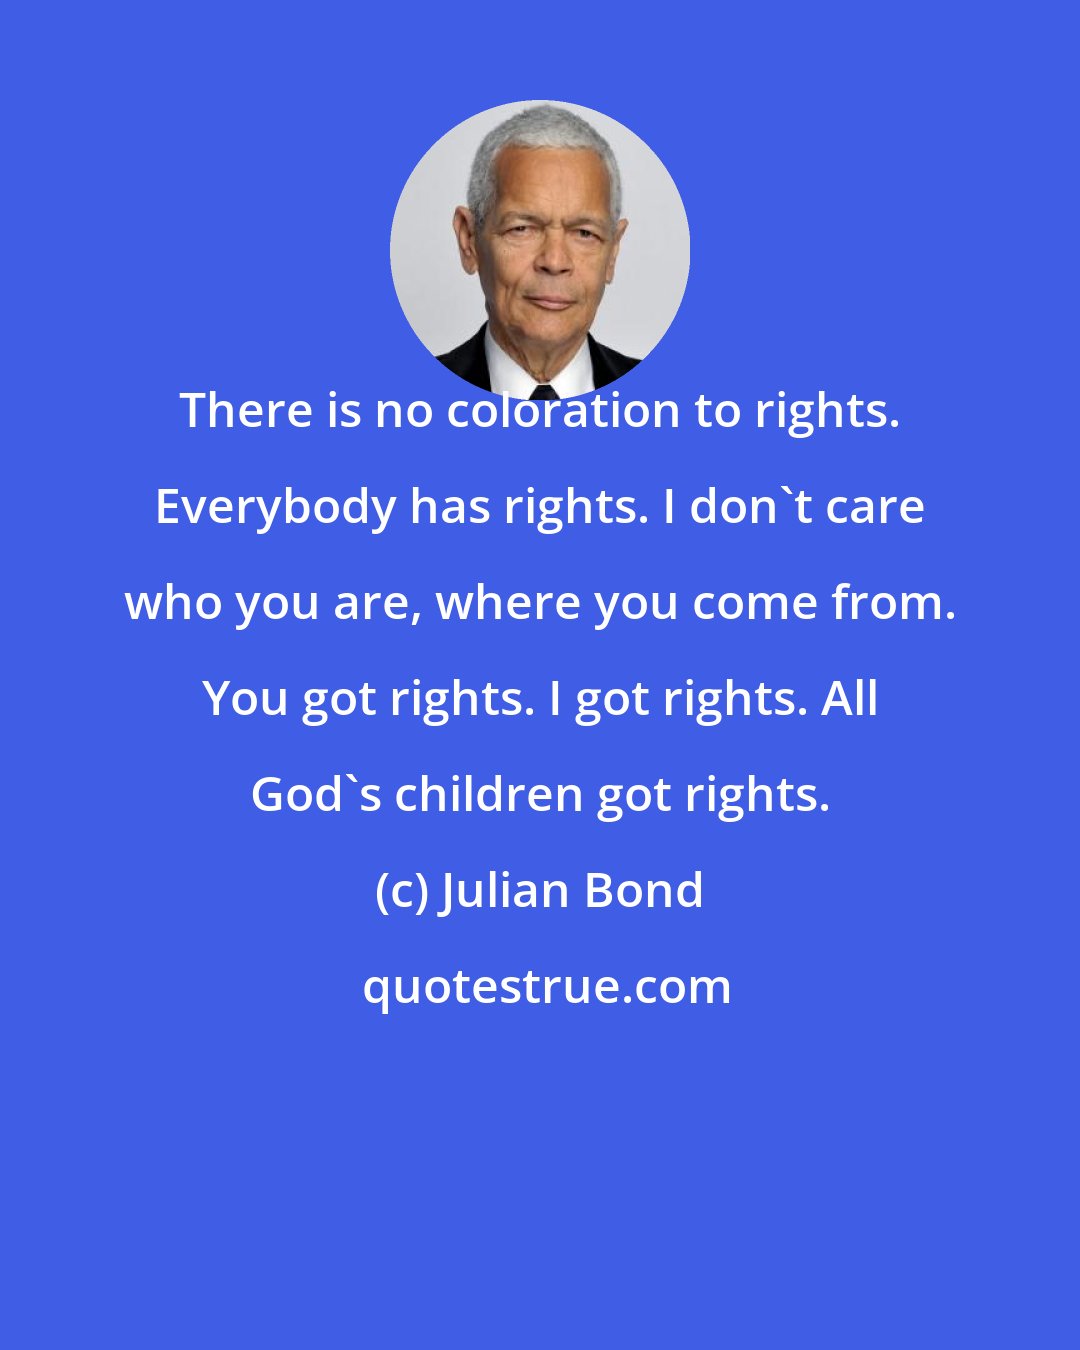 Julian Bond: There is no coloration to rights. Everybody has rights. I don't care who you are, where you come from. You got rights. I got rights. All God's children got rights.